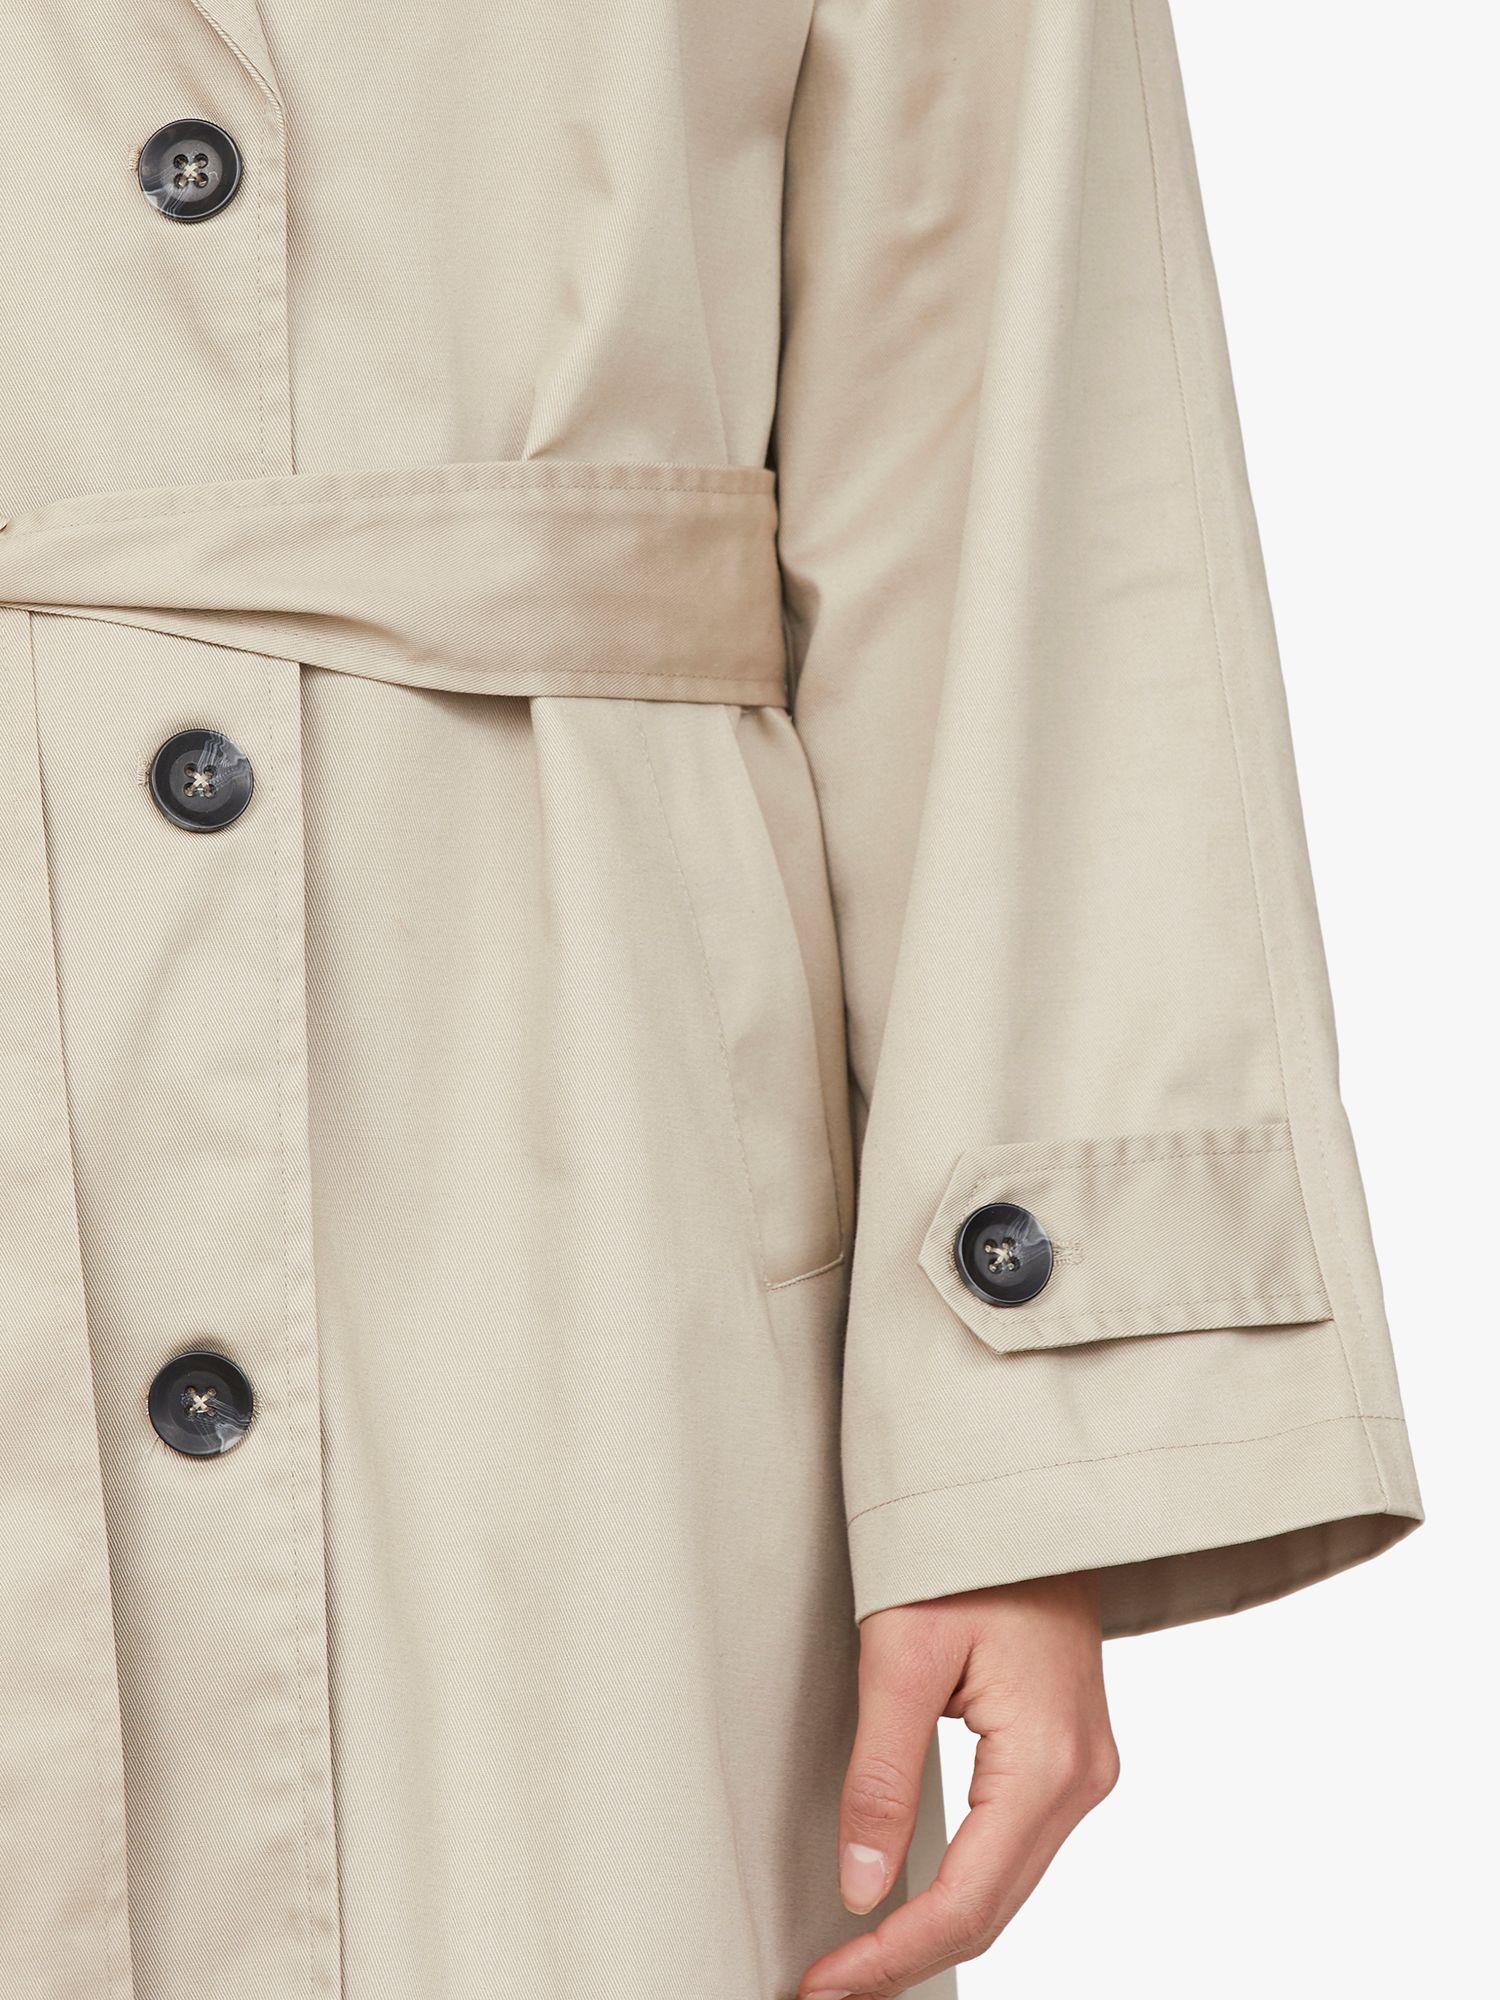 Buy Sisters Point Dar Long Classic Trench Coat, Sand Online at johnlewis.com